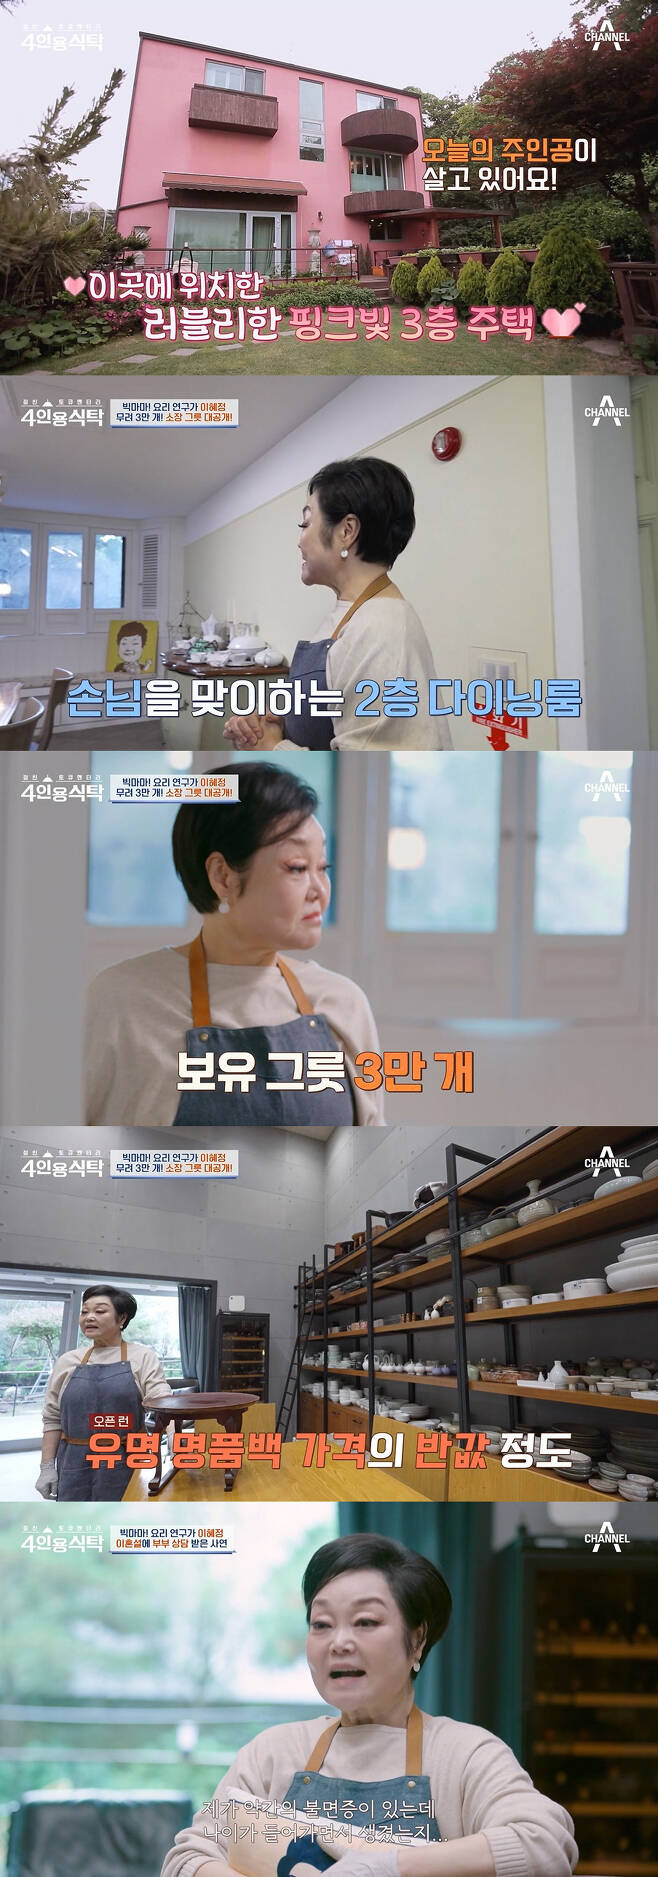 Lee Hye-jung, a four-person table, told Husband, the wounds he had accumulated on his mother-in-law.On Channel A Four-Person Dining Table broadcasted on the 6th, Cooking studies Lee Hye-jung invited acquaintances to serve meals.Lee Hye-jung, who lives in a pink detached house, said, Thats the charm of this house. Thats why I live here.The first floor was the Cuisine studio, and the second floor was the dining room where guests were welcomed. Like a Cuisine researcher, every cabinet was filled with containers. Lee Hye-jung said, It seems like 30,000.Lee Hye-jung said, There is a lot of history in this class. I want to collect more of these, but its not easy. I have to work harder. Its about half the price of a luxury brand.Lee Hye-jung, who appeared on Channel As Oh Eun Youngs Golden Pages, thanked Oh Eun Young, saying, I had some insomnia after I brushed it off to the end, but I slept really well that day. Ive been comfortable since then.Lee Hye-jung invited guests to Kim Young-ok, Hong Yoon-hwa and Han Jin-woo, an oriental doctor. Lee Hye-jung invited guests to the elevator in the house. Lee Hye-jung said, Husband is a thankful gift to me.I told him that I had to do this because it was hard to carry my baggage. I do not know what to do if I do not have this one every time I carry my baggage.Lee Hye-jung said, I wanted to do Cuisine when I went to college, but I wanted to marry a good house because I was a daughter.I did not think of a job called Cuisine, but I went to Hotel Kitchen because I wanted to do Cuisine. He said he went to work at Hotel Kitchen without pay.However, at the age of 24, he married Husband and broke Cuisines dream and lived as a housewife for a while. Lee Hye-jung said, My older child was sick. It was congenital heart disease.If you stay well for a year, there is no problem, so you have to feed well and feed the balance. From then on, I thought it was nutrition.Lee Hye-jung said, Husband has influenced me in many ways. I do not know where Somalia is than Somalia news.So I said, What are you good at? So I said, Is there anything I can do?Lee Hye-jung said, When I tried to write down what I could do on paper, I couldnt find it. It was so sad. Then I remembered that my father-in-law and son praised my Cuisine. Thats why I took a Cuisine class that day.Lee Hye-jung, who appeared on the air afterwards and walked the path of full-scale cooking studies. Lee Hye-jung said, I did not say anything because I was good at it. HusbandAt that time, Husband said, If you look at me, I will give you half of the performance fee.However, he confessed, Many people scolded me. When I passed by, they slapped me on the back and told me to stop cursing the groom. He also said that he looked ugly.Kim Young-ok said, Is not it possible to talk about (Husband) throwing it on the road?Lee Hye-jung said, The day I left me in Sunsan, I walked for about two hours and a taxi came. The kids said that my dad kept looking back.But I could not go back, so I drove slowly. Lee Hye-jung said, Husbands personality is XX. But thats a descent. My mother-in-law went to the market with me.At that time, I couldnt find my home. I dont know where it is. I think Ive been wandering for an hour. I guess theres DNA like that, he said.